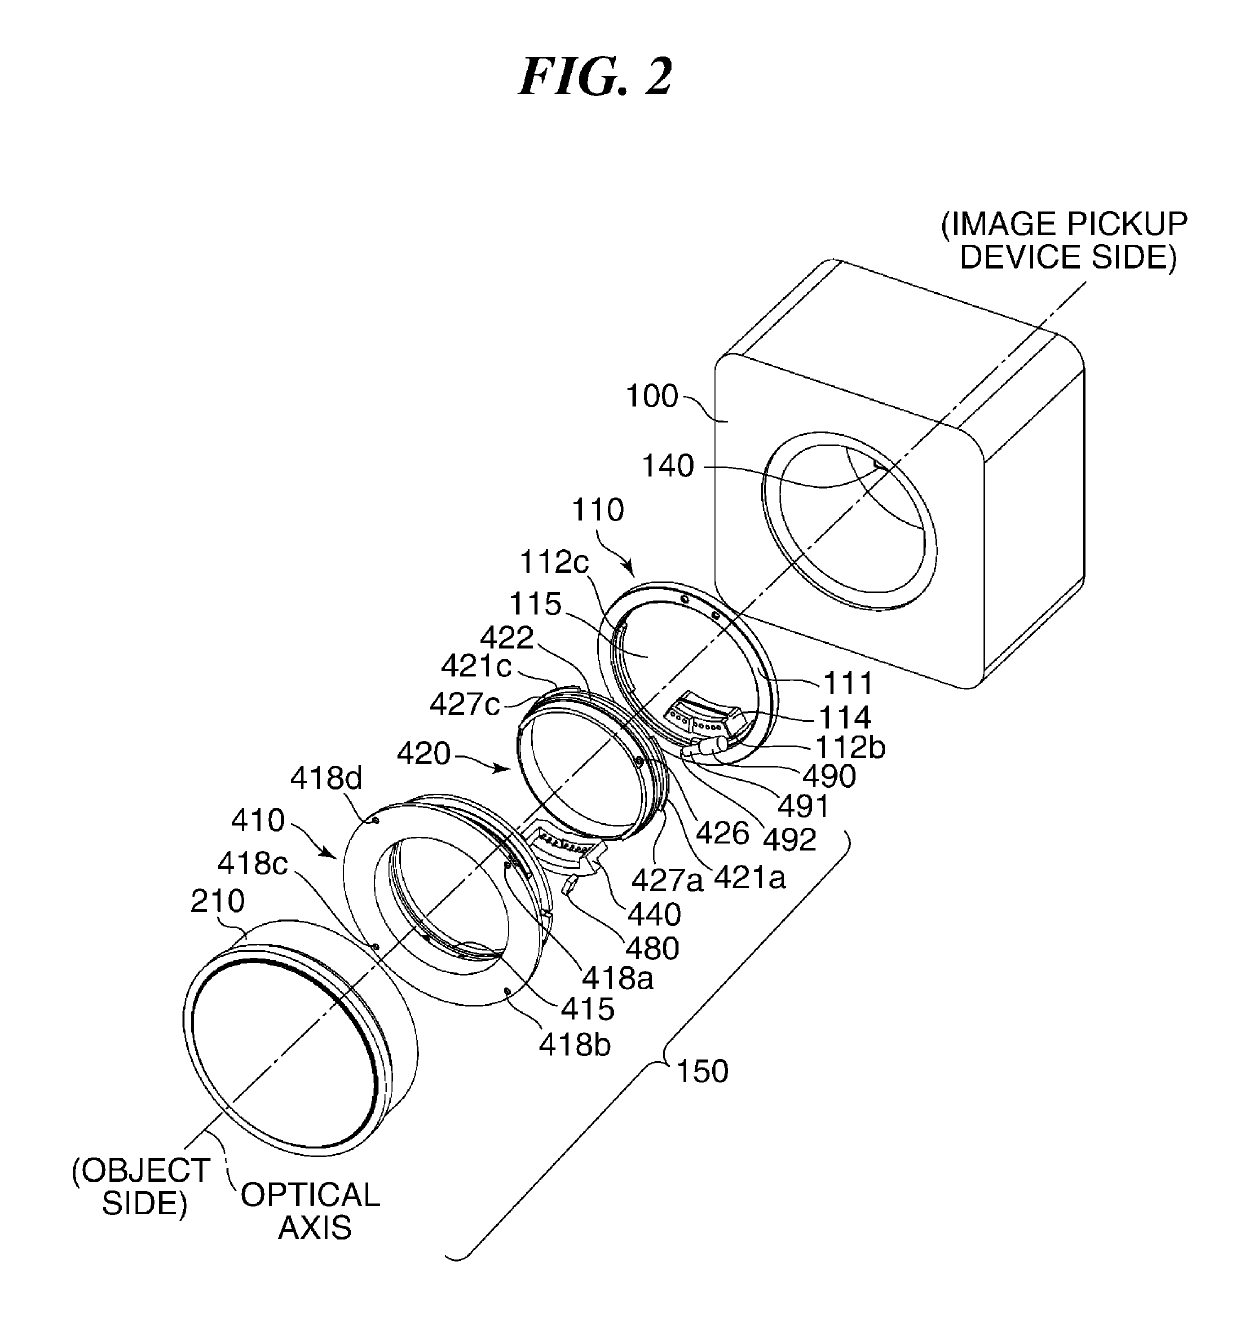 Lens mount for use in attachment/removal of interchangeable lens, interchangeable lens, and image pickup apparatus